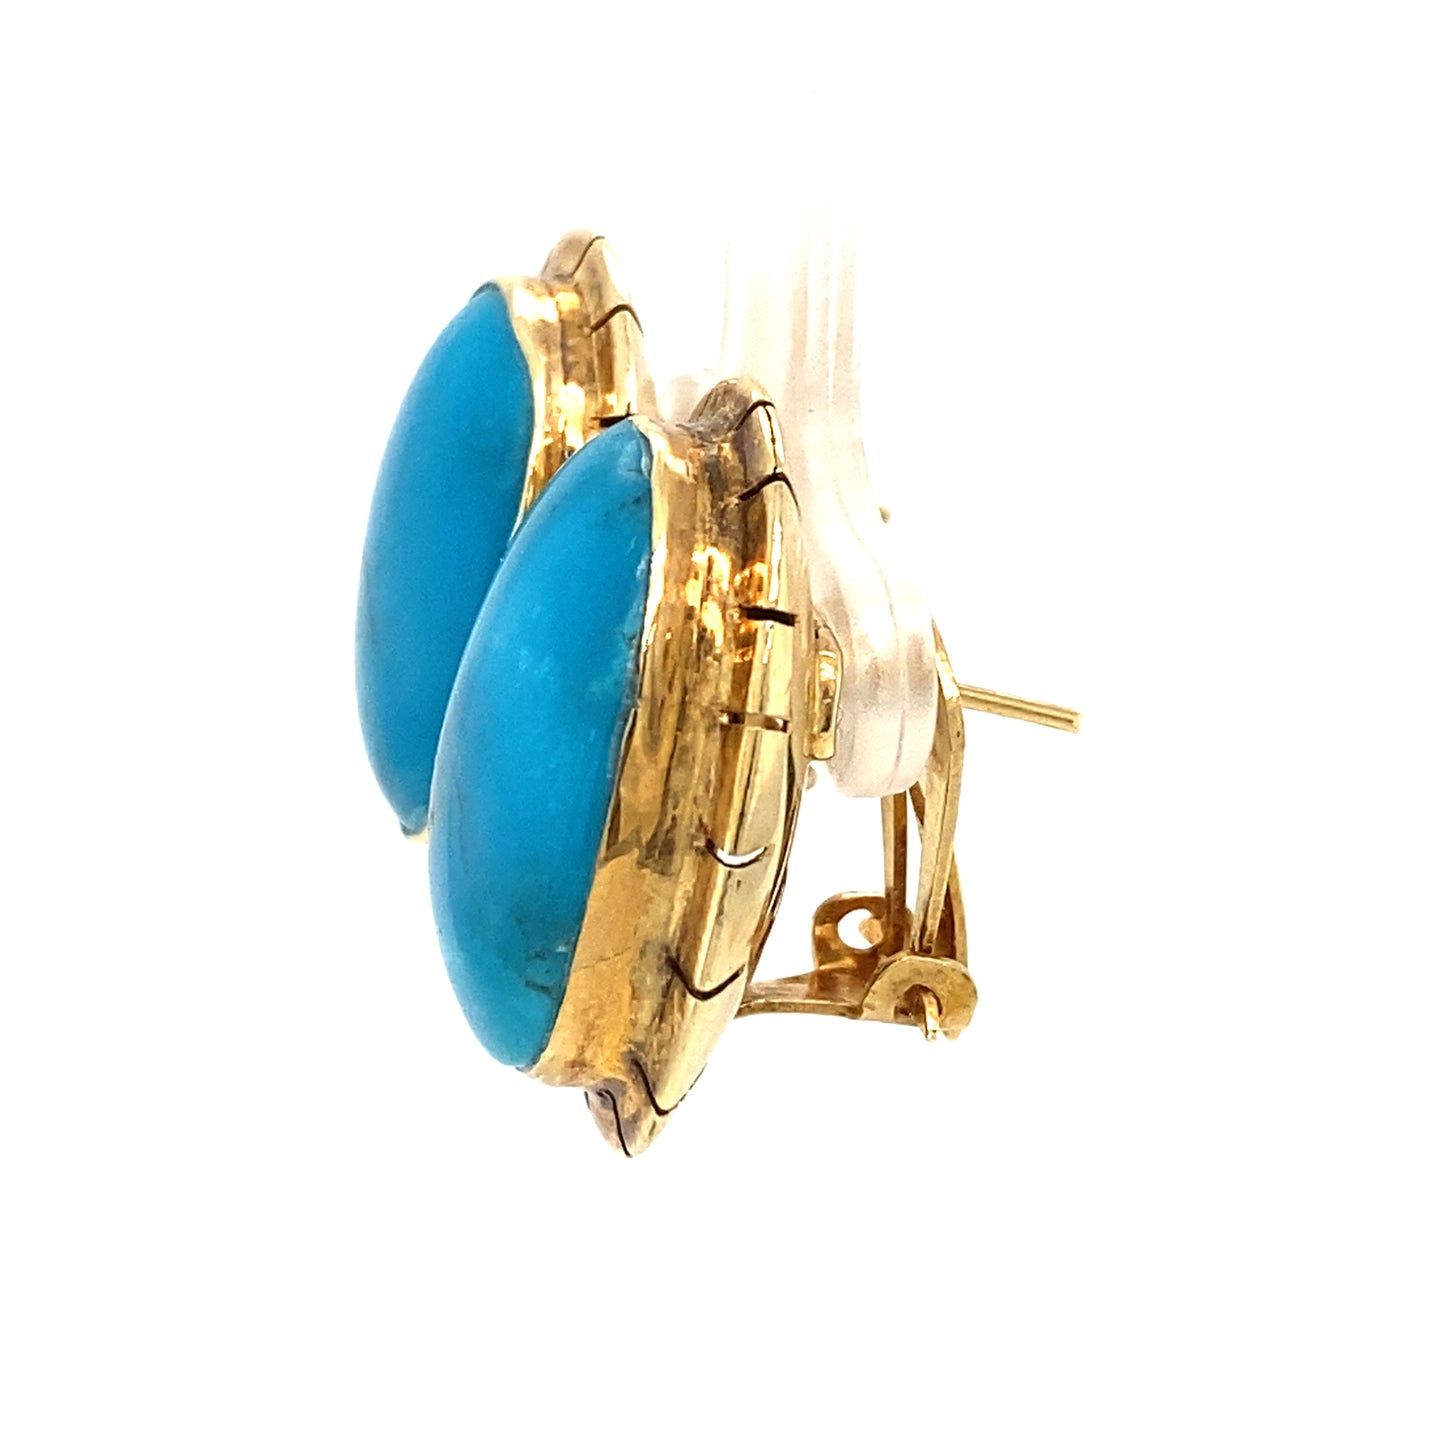 Circa 1960s Retro Oval Turquoise Earrings in 14K Gold